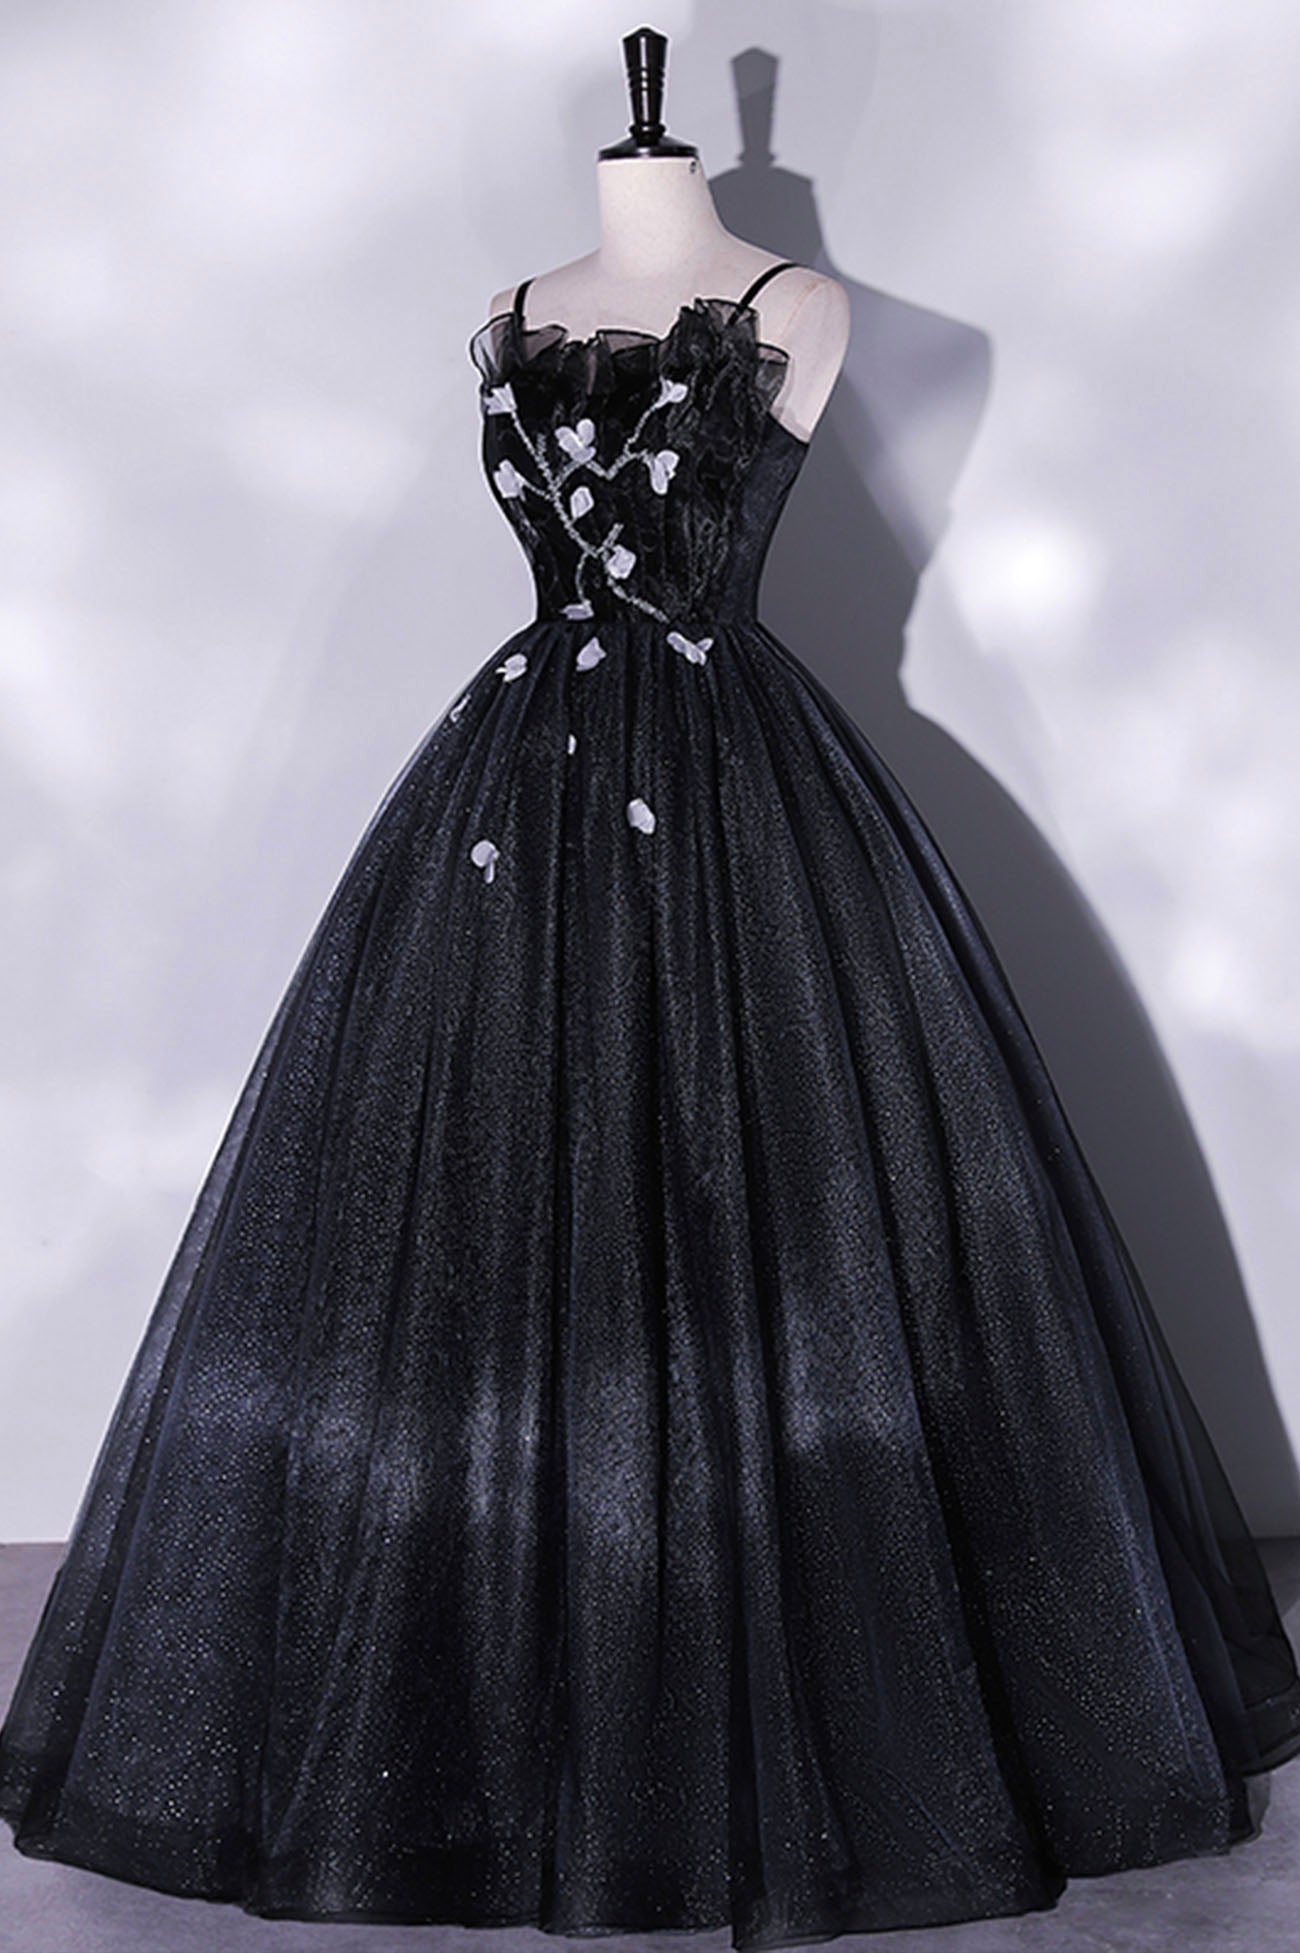 Prom Dresses 2018, Black Tulle Long A-Line Evening Gown, Black Spaghetti Strap Evening Gown